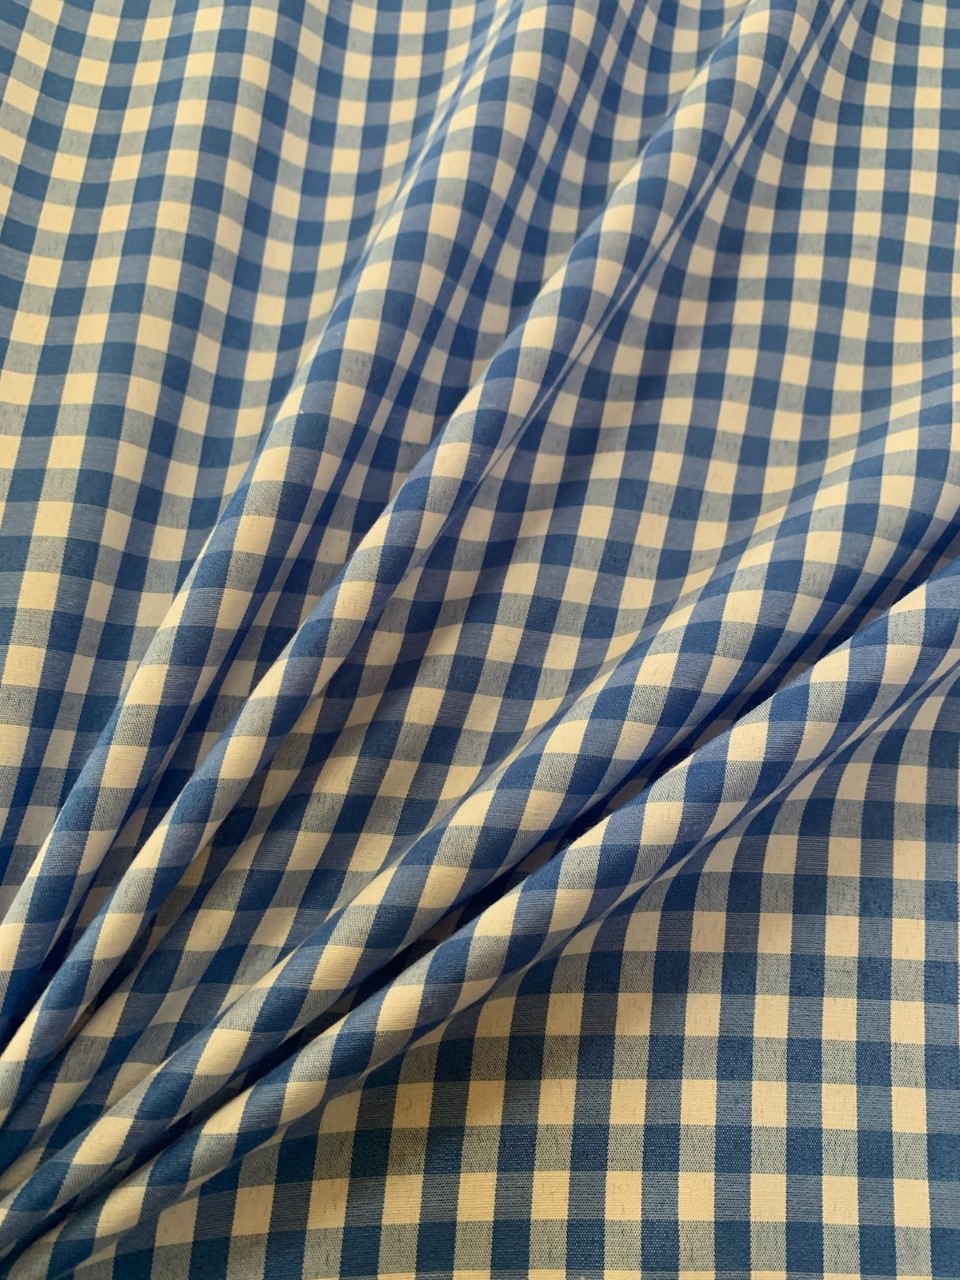 1/4" Blue Gingham Fabric 60" Wide By The Yard Poly Cotton Blend